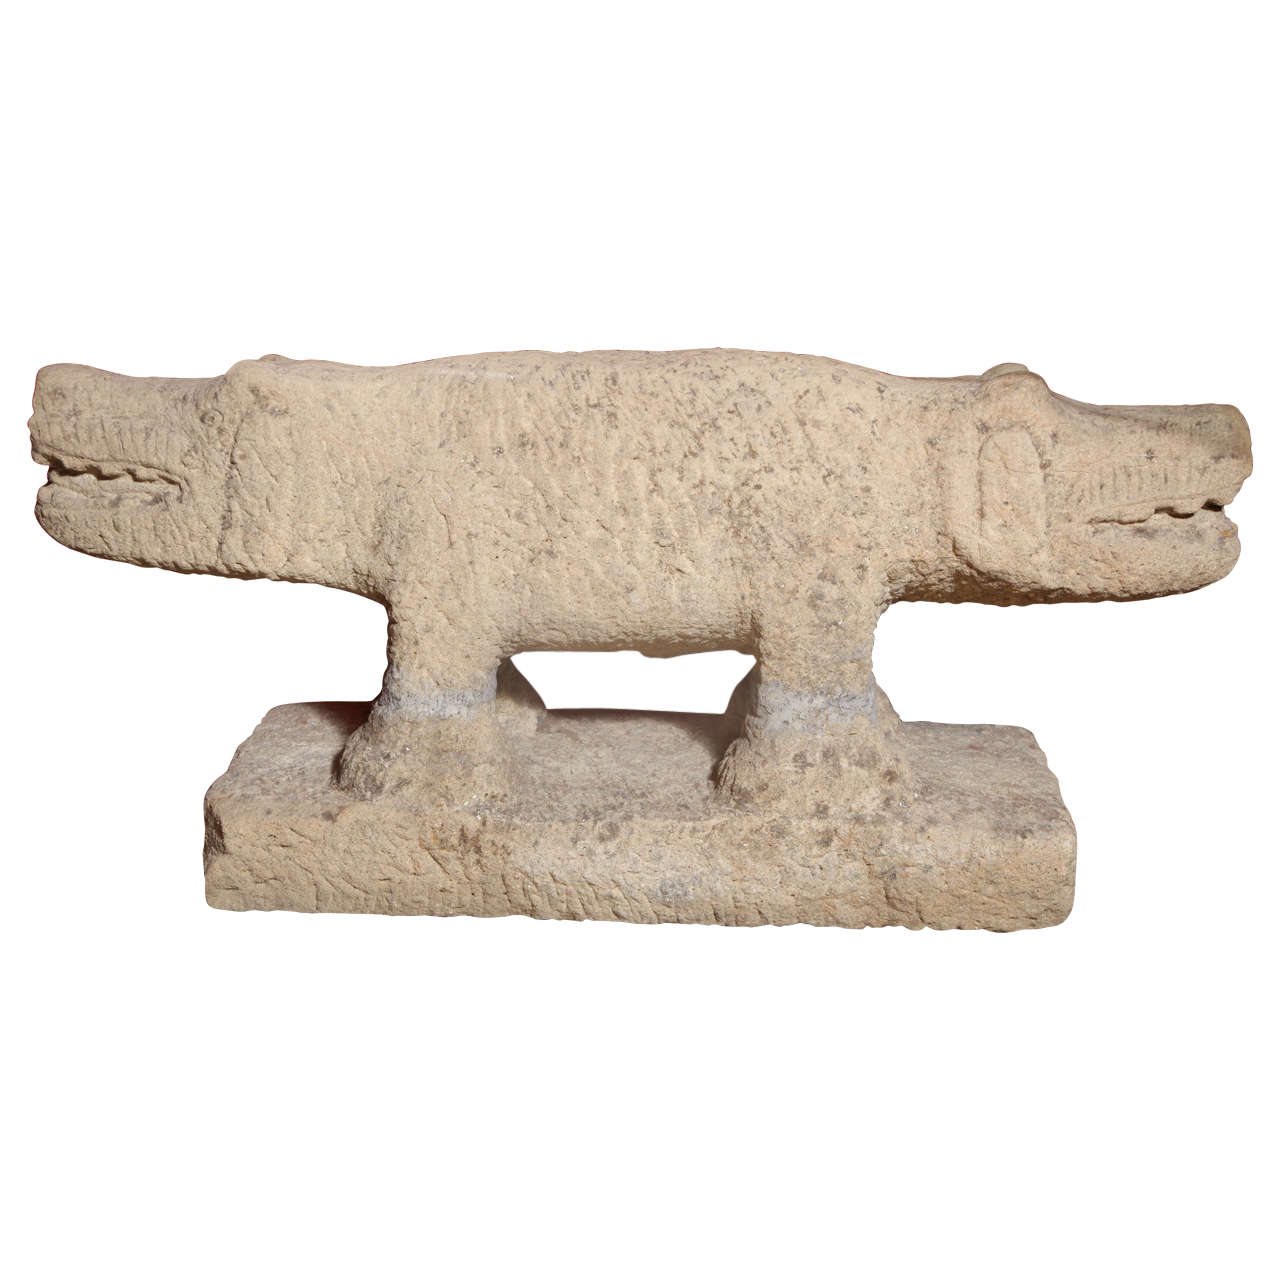 Two-Headed Stone Mythical Creature For Sale